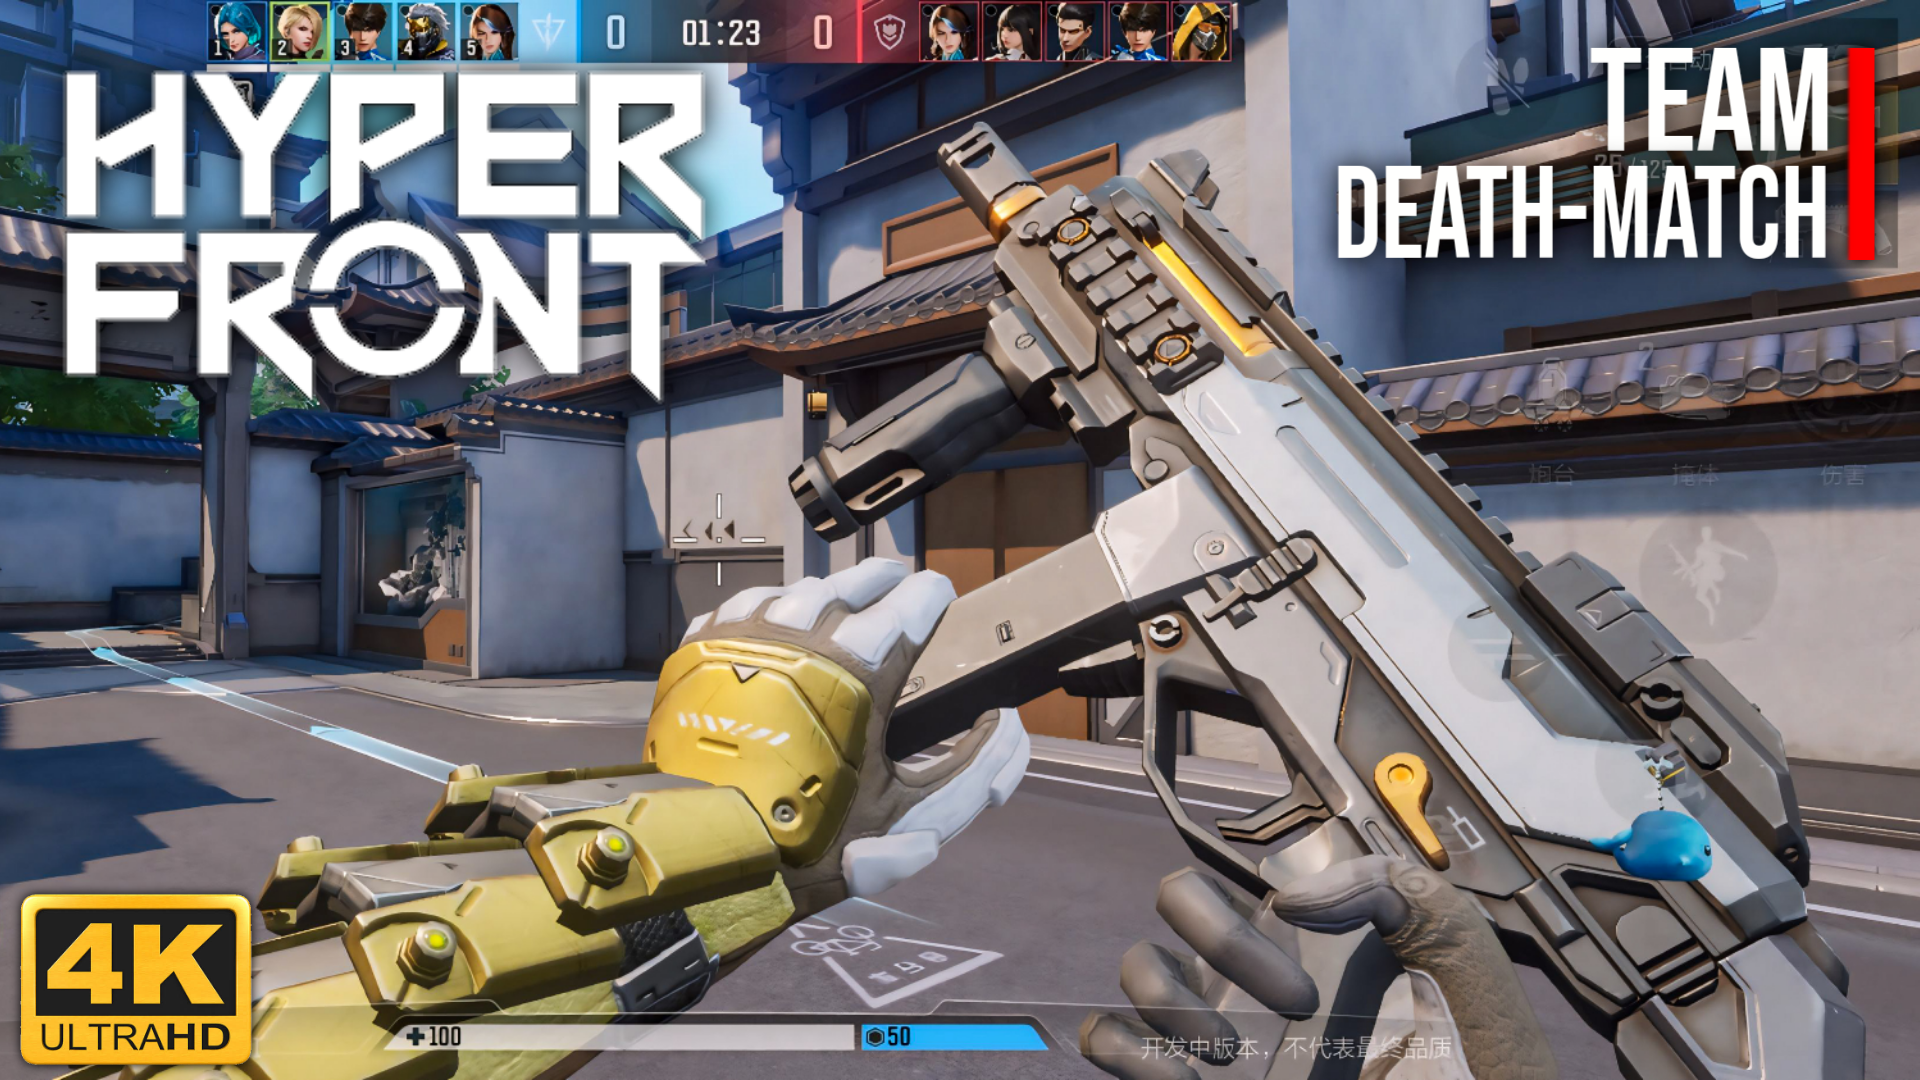 HYPER FRONT IS BACK! TEAM-DEATHMATCH ULTRA GRAPHICS 90FPS - GAMEPLAY